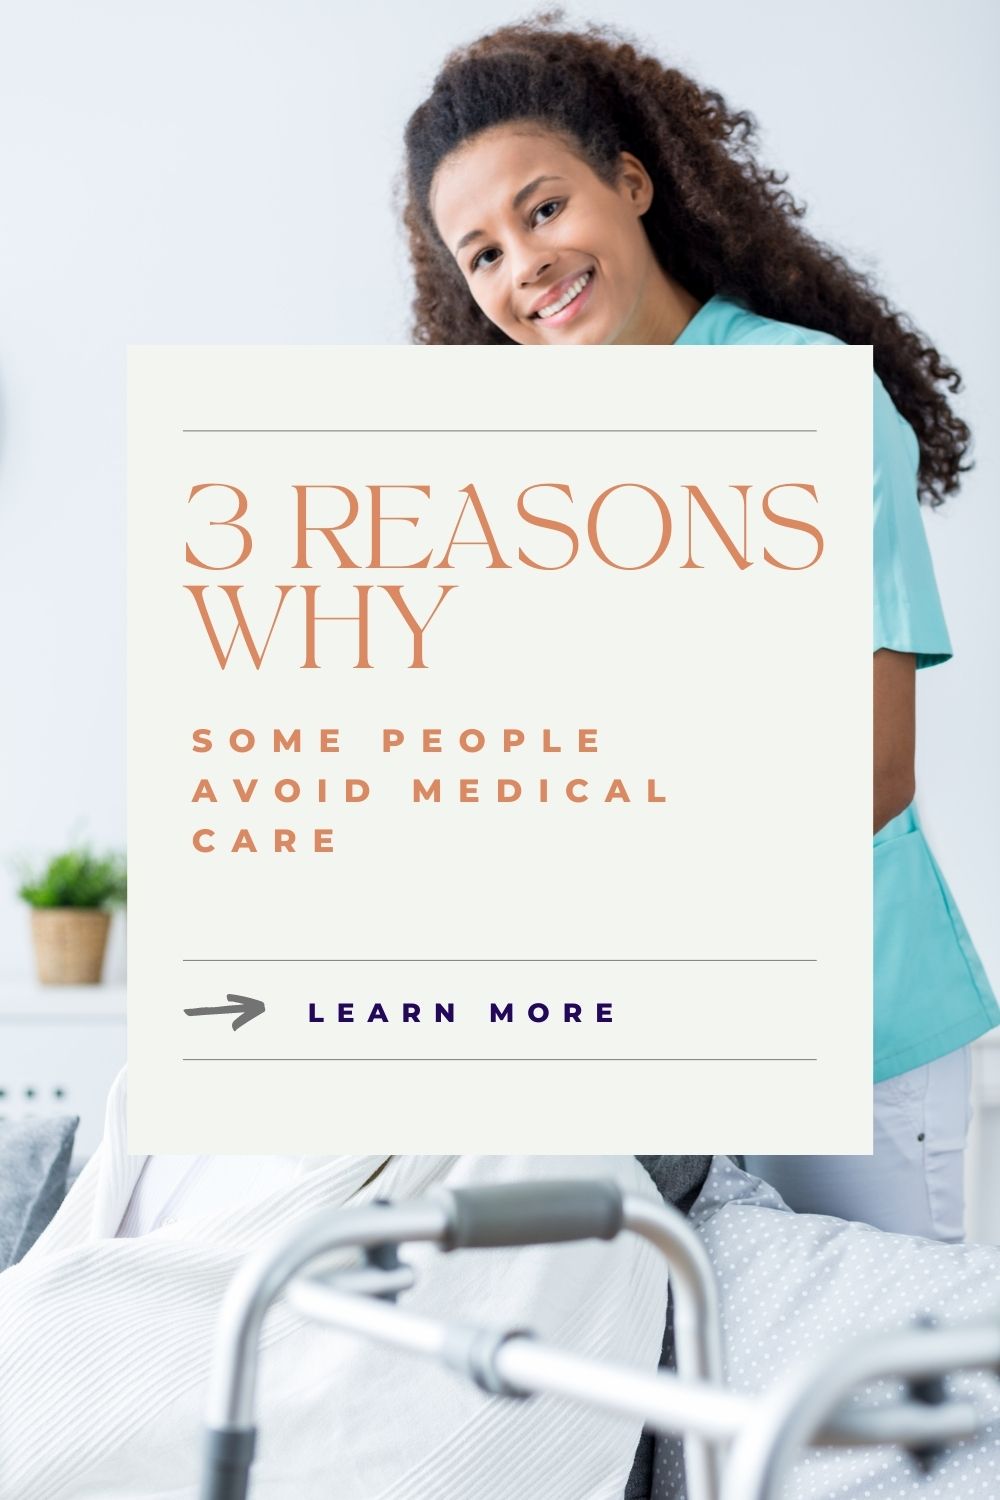 3 Reasons Why Some People Avoid Medical Care